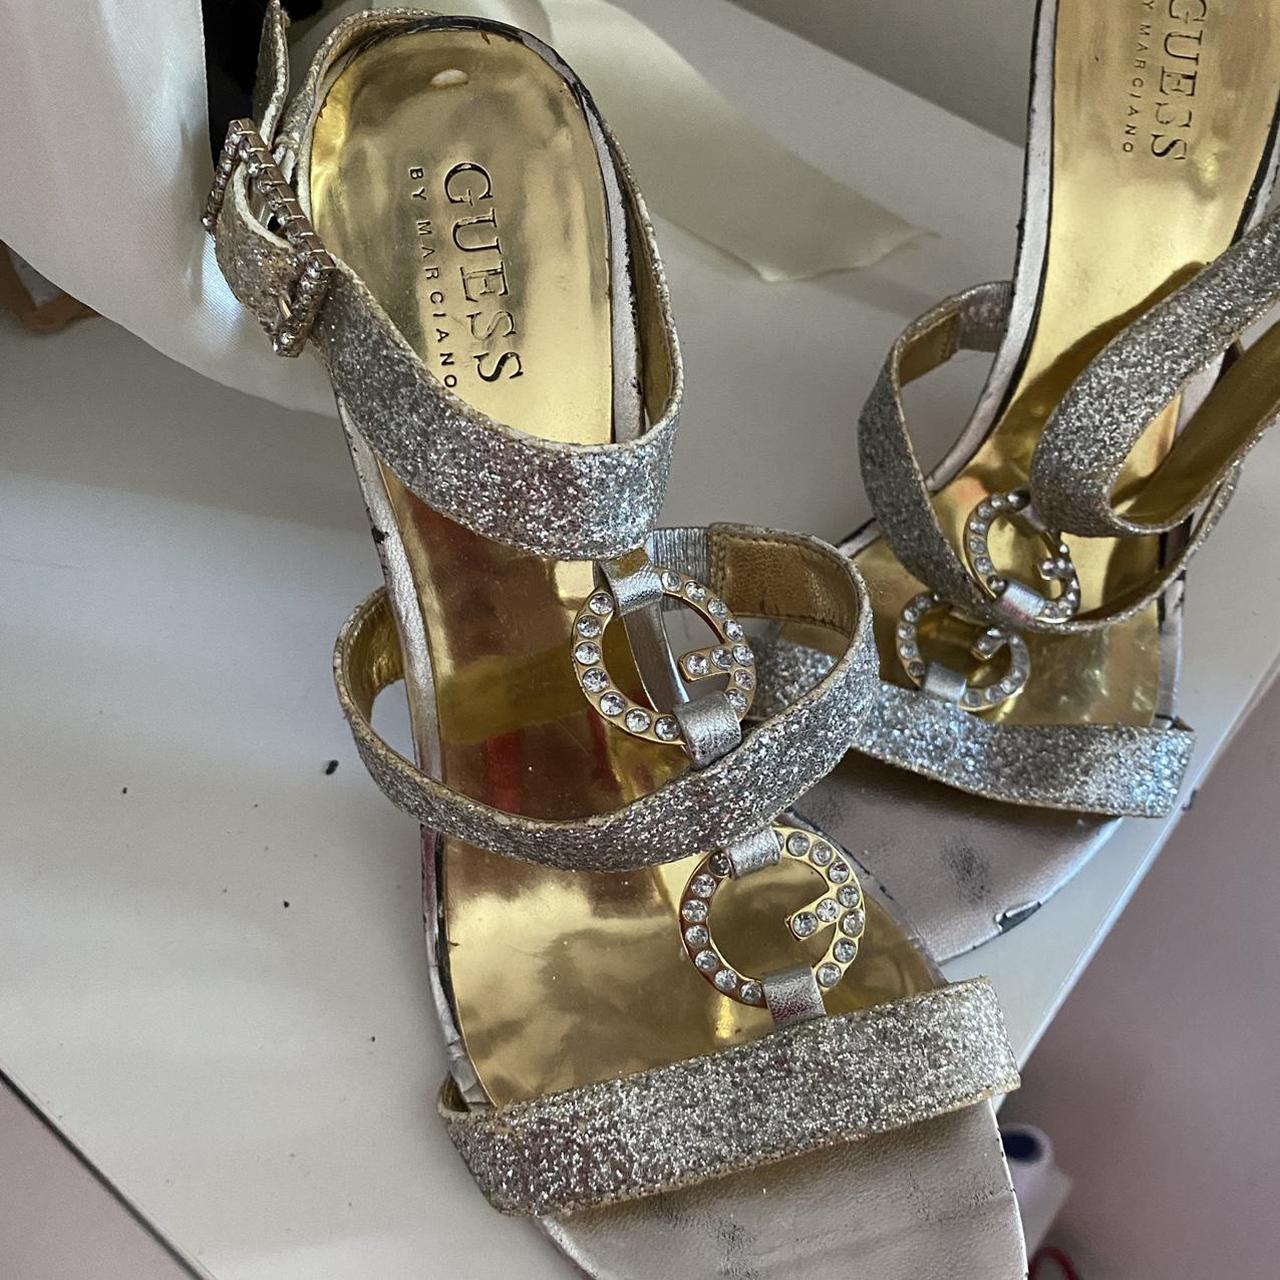 Product Image 3 - Vintage guess heels💗💗💗😭
Size 7 
Gold